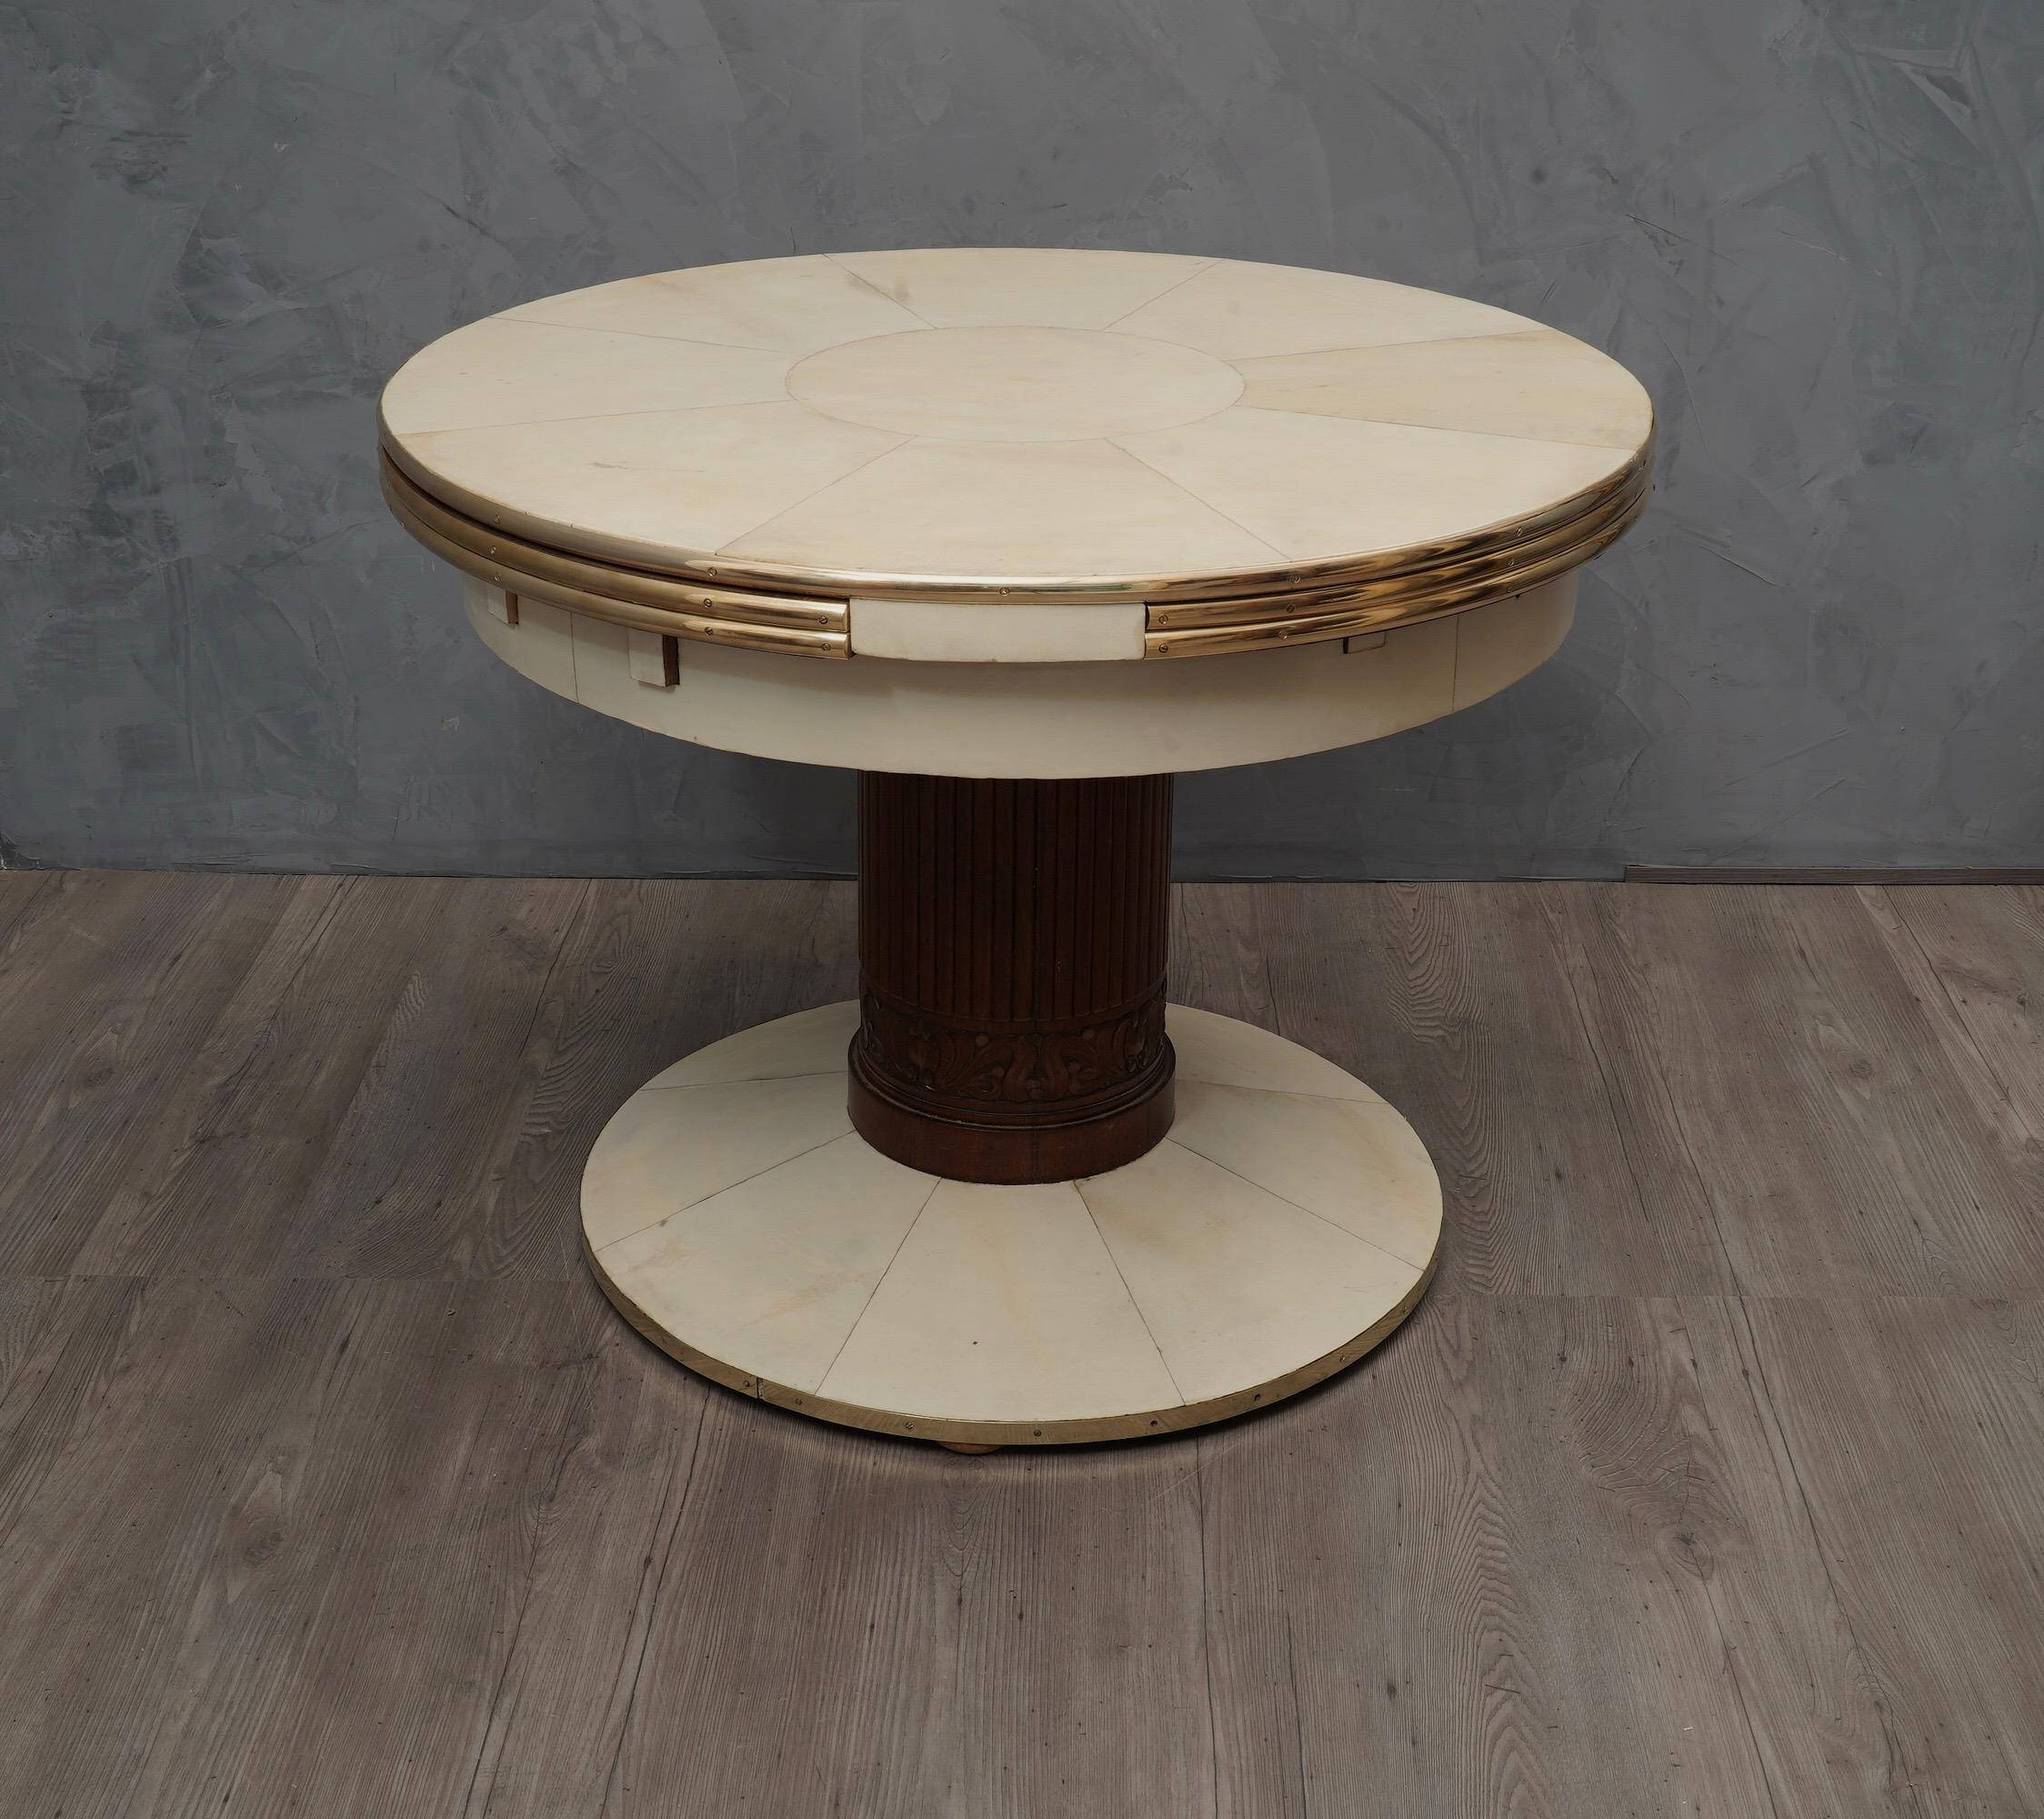 Italian Art Deco Round Ash Brass and Goatskin Openable Table, 1920